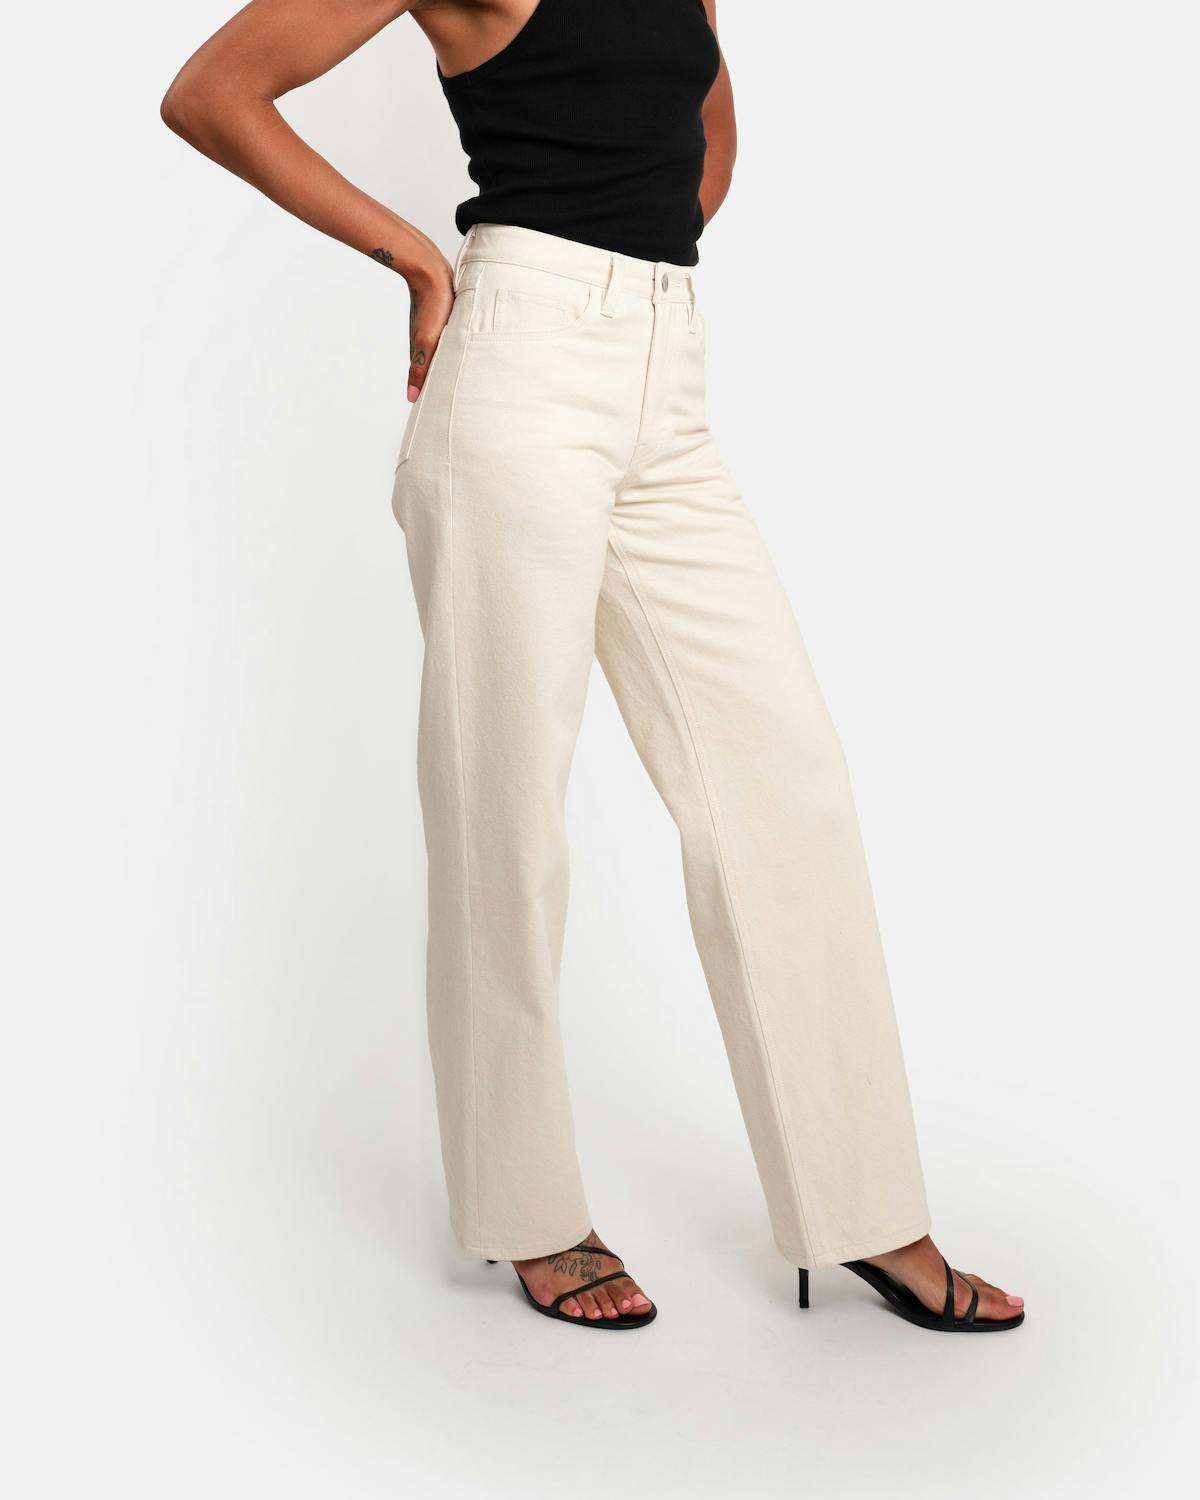 wide leg jeans in natural - unspun made to order